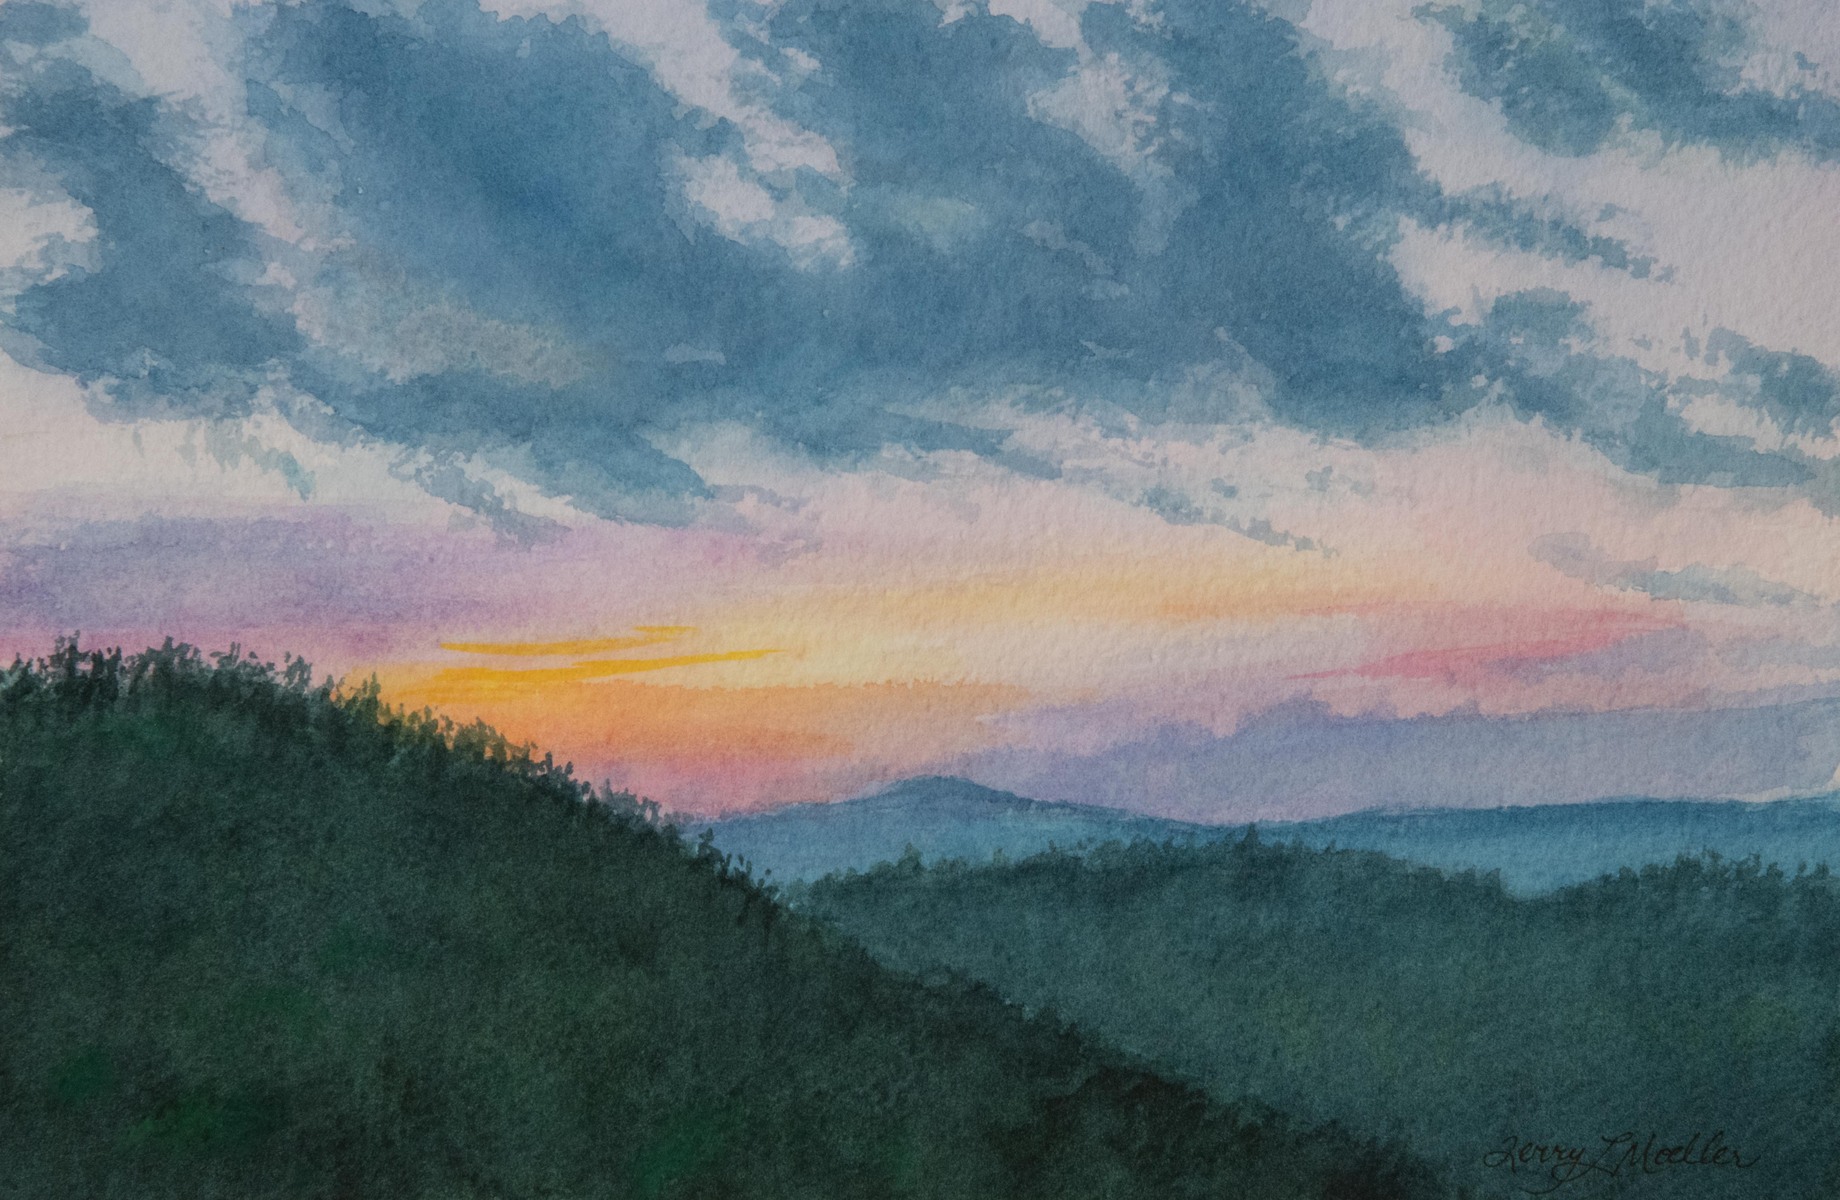 "Sunset in Saluda, NC"  7" X 10.5" watercolor on 140 lb. cold press watercolor paper